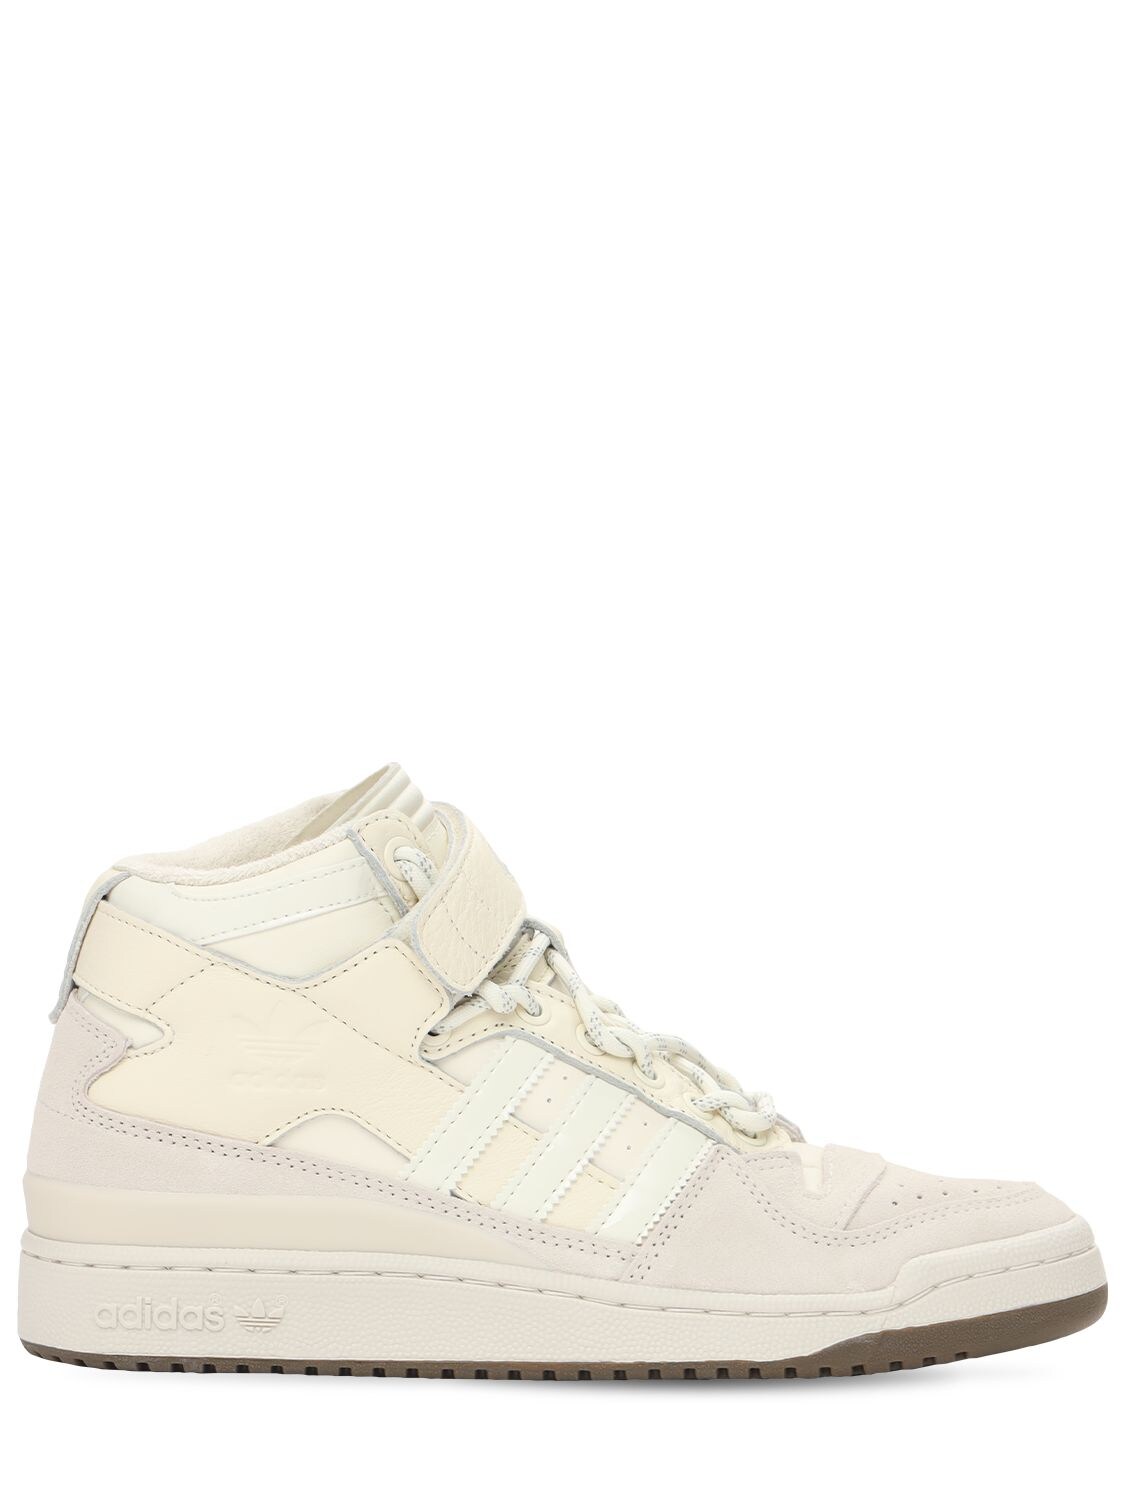 Adidas X Ivy Park Forum Mid Sneakers In Cream,white